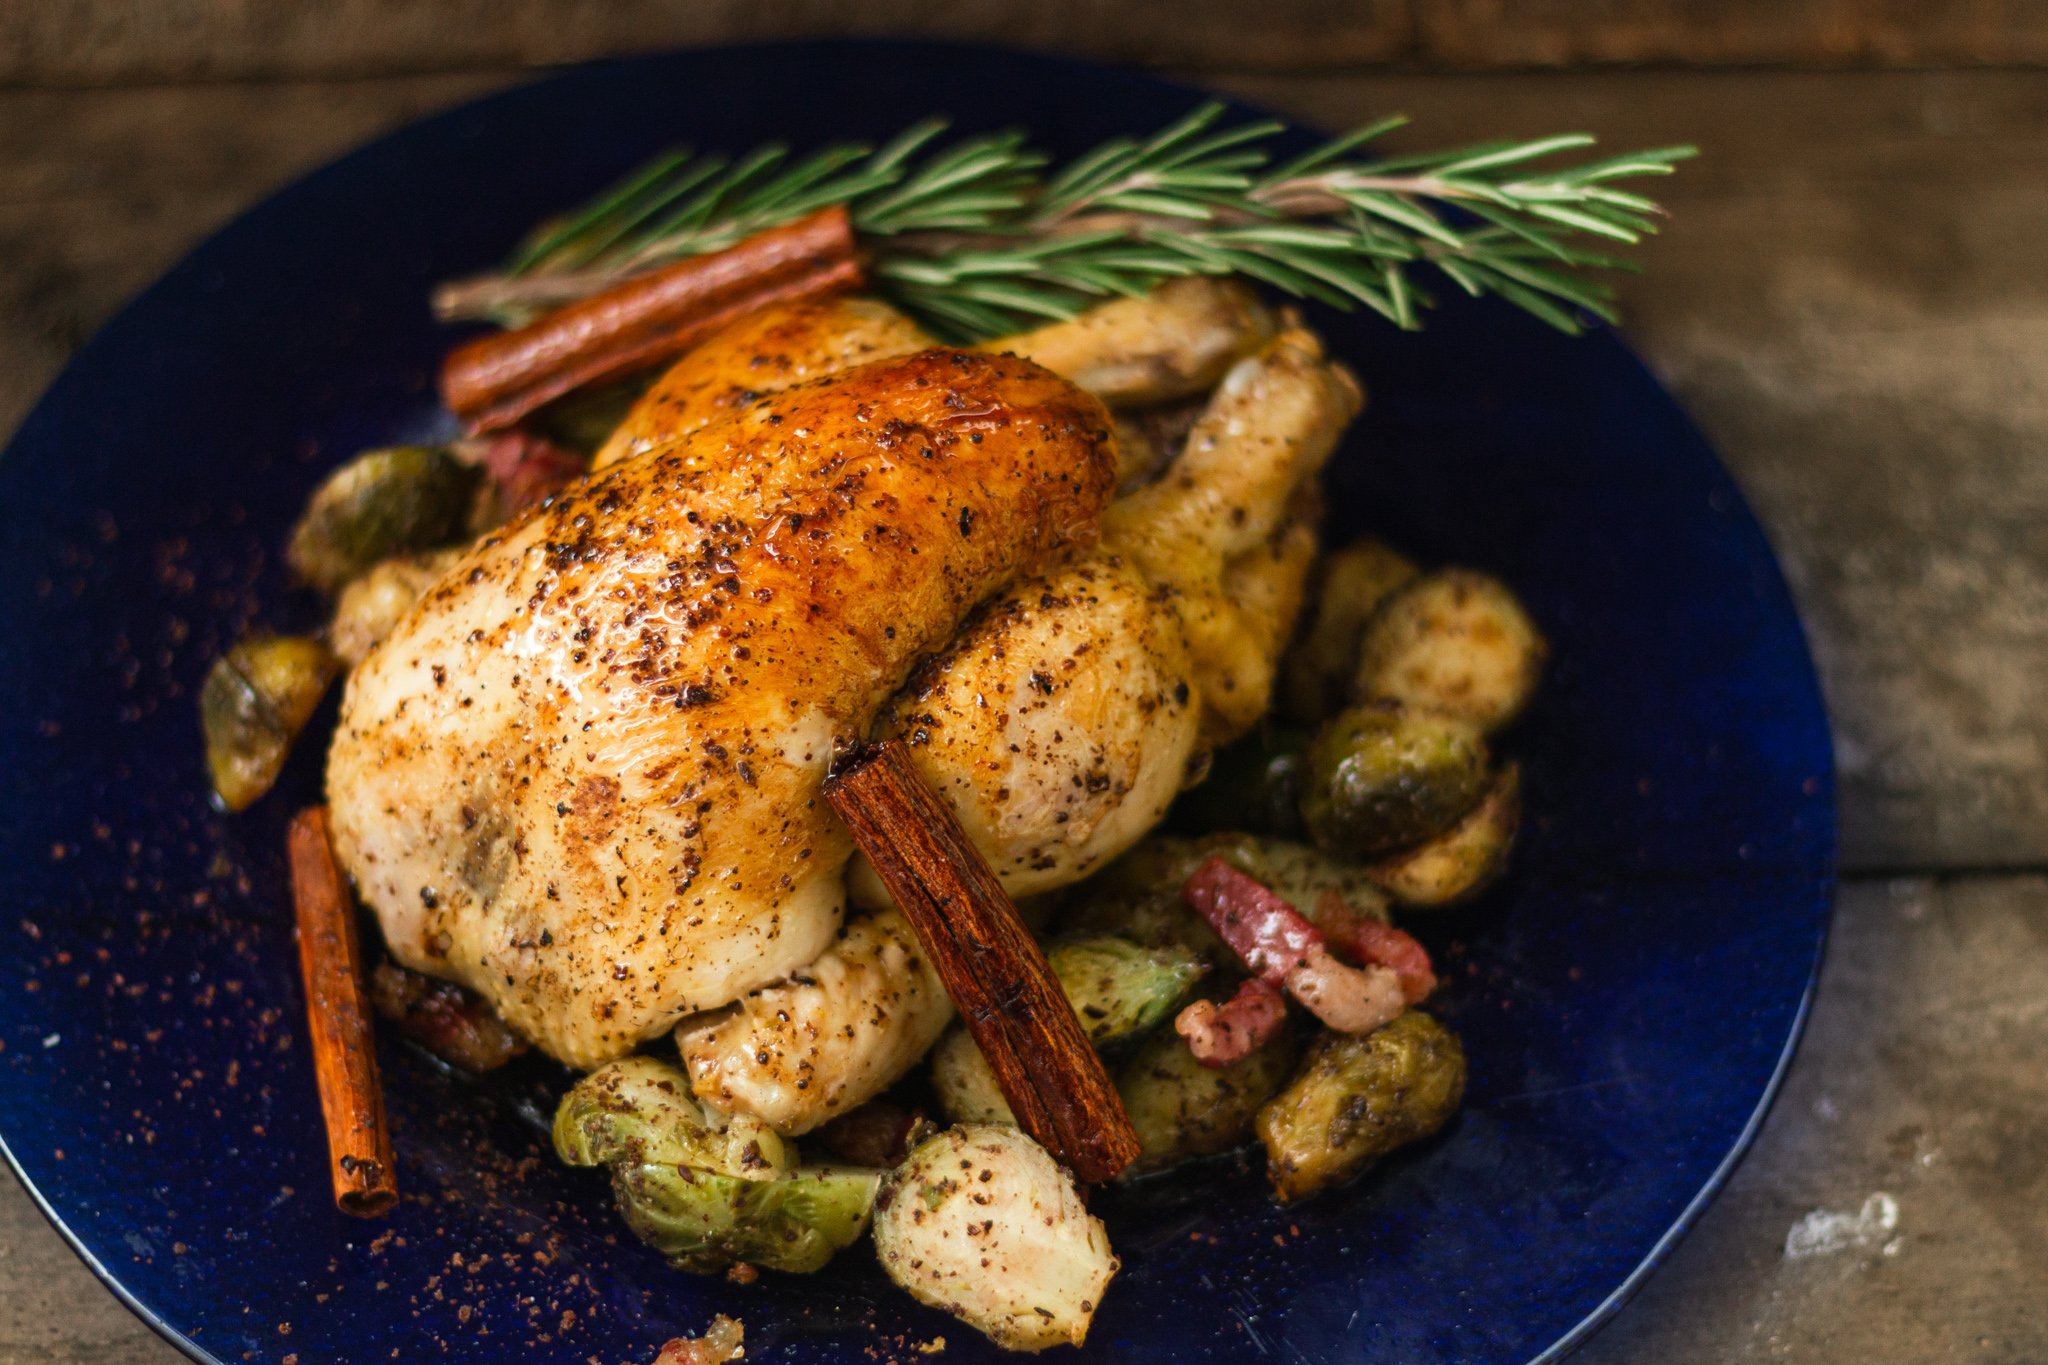 Cinnamon and Sumac Roasted Poussin